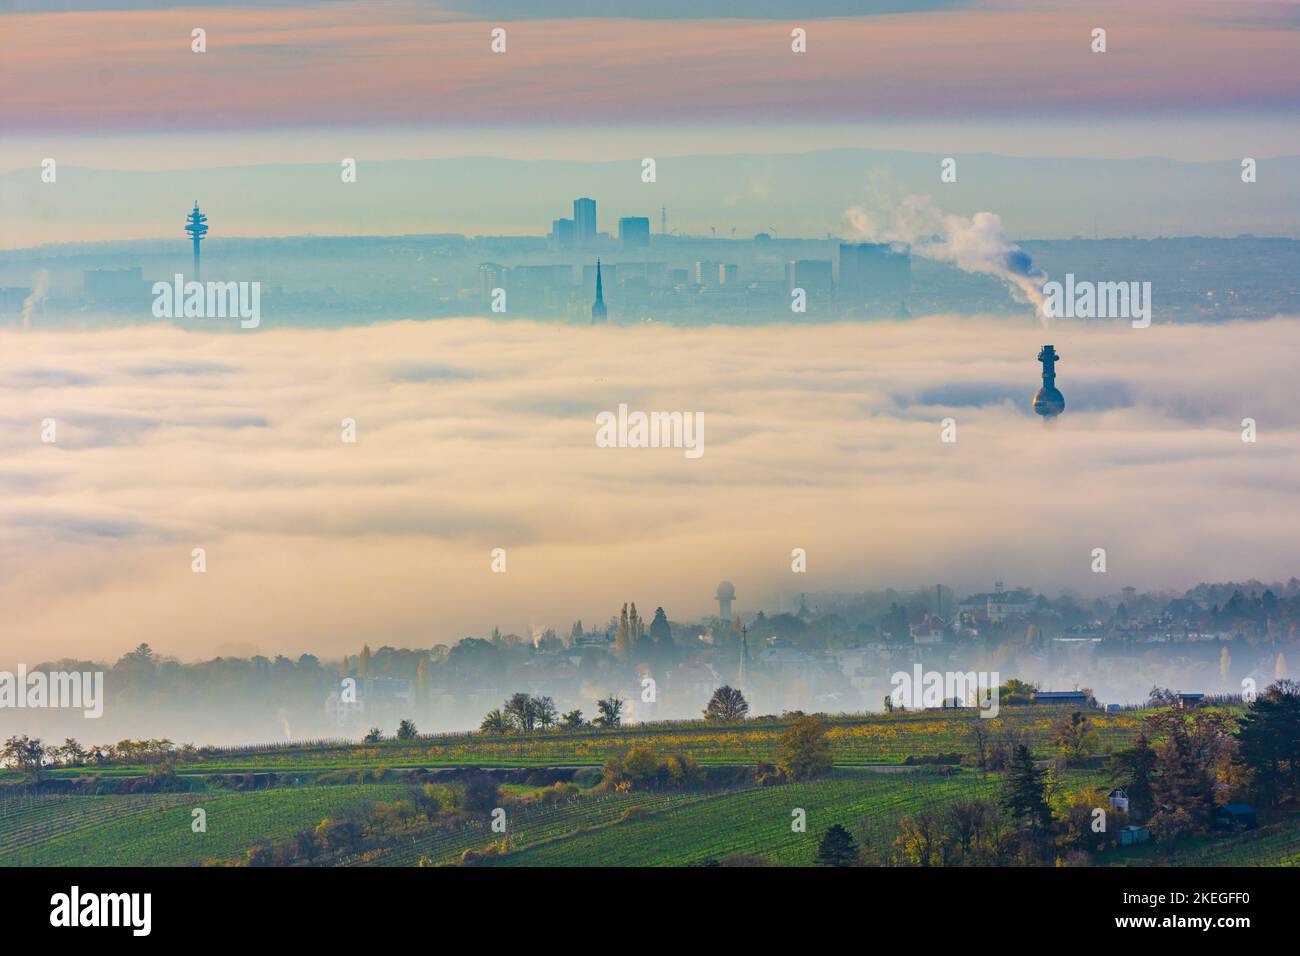 Wien, Vienna: towers stick out from ground fog, tower in Arsenal, steeple of Stephansdom (St. Stephen's Cathedral), chimney of Spittelau waste inciner Stock Photo